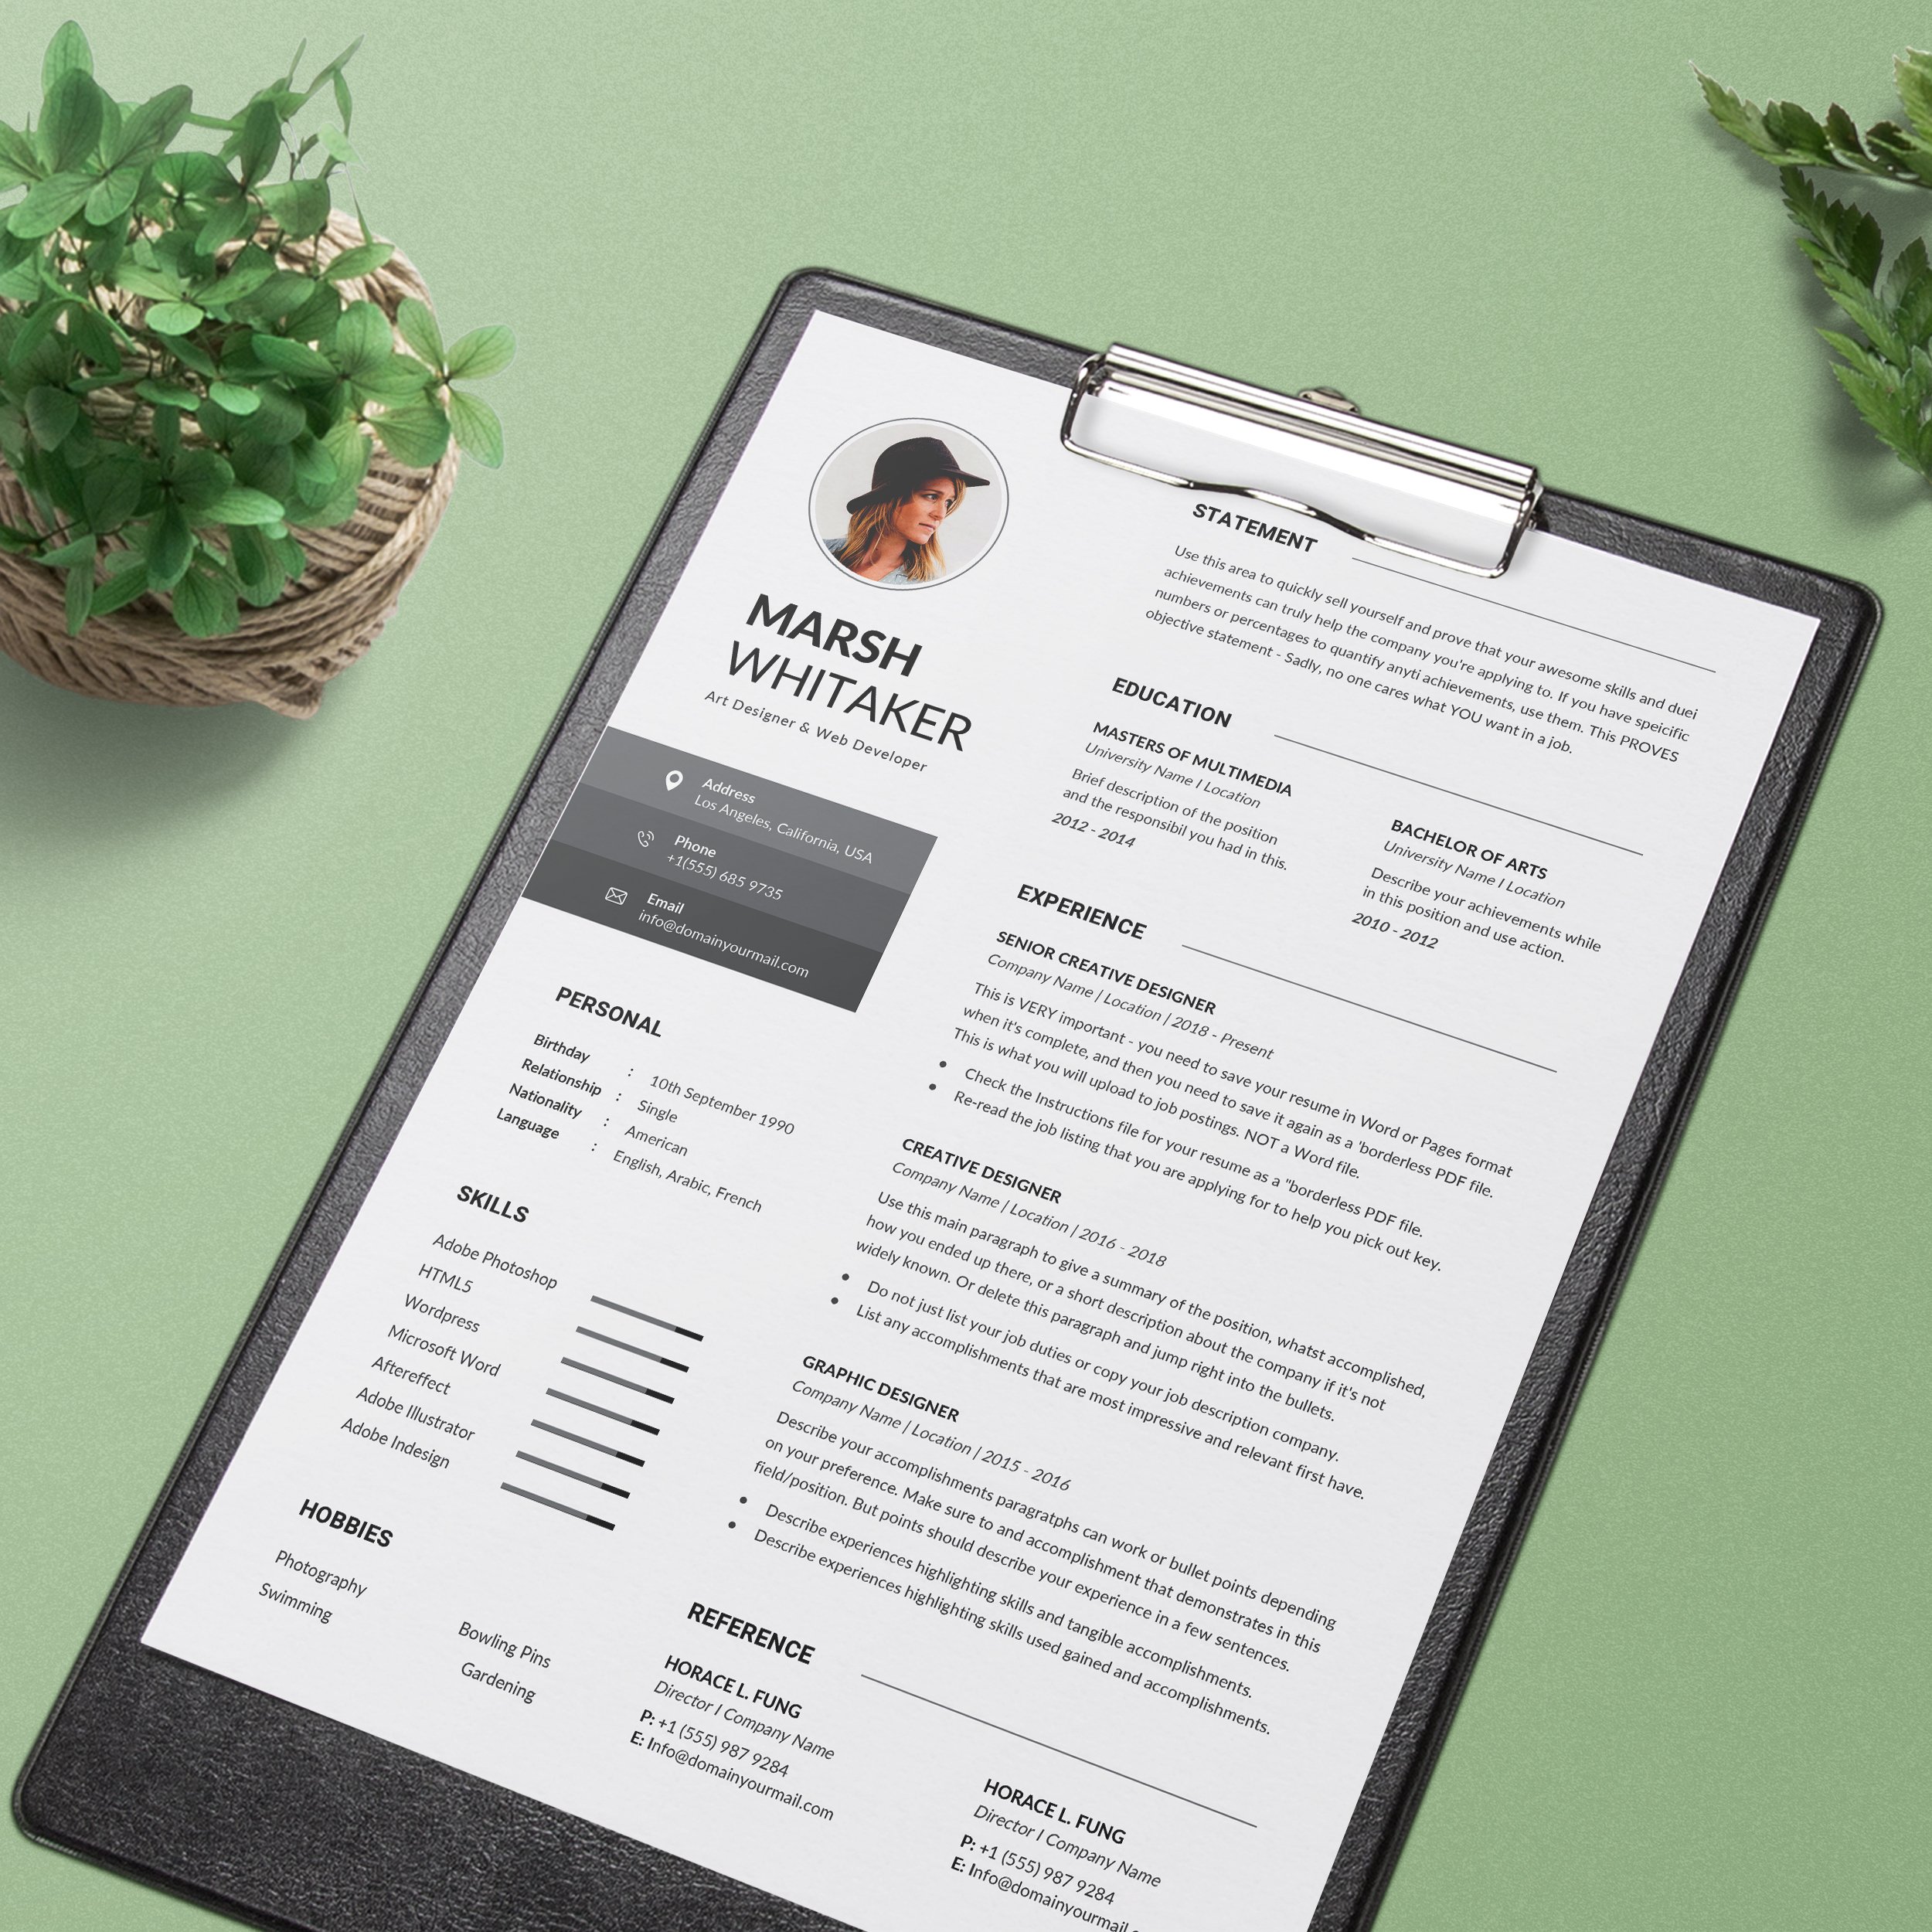 Black and white resume on a clipboard next to a potted plant.